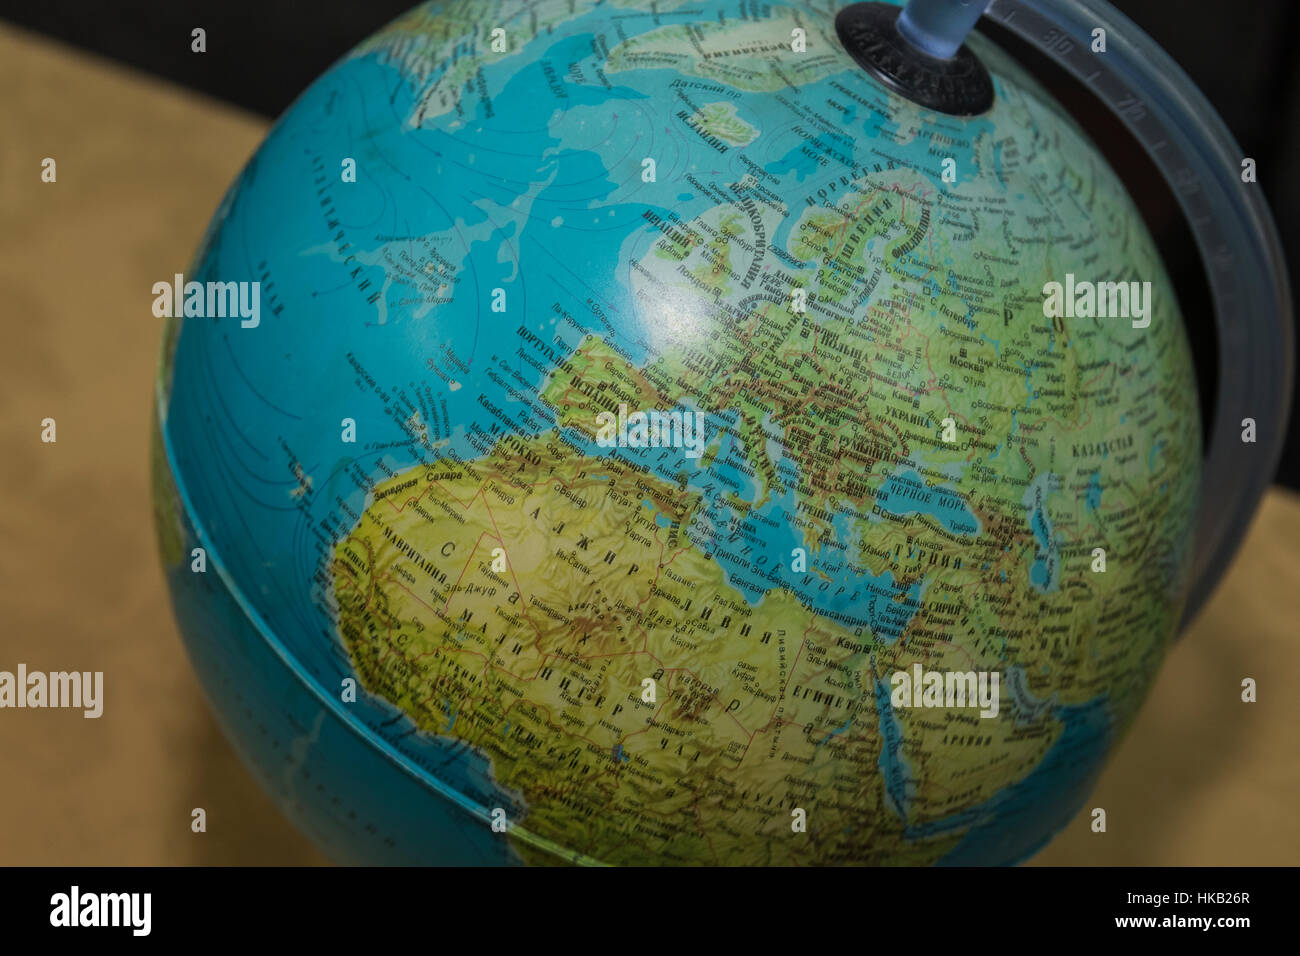 Globe, view of the Mediterranean Sea, Western Europe and North Africa. Stock Photo